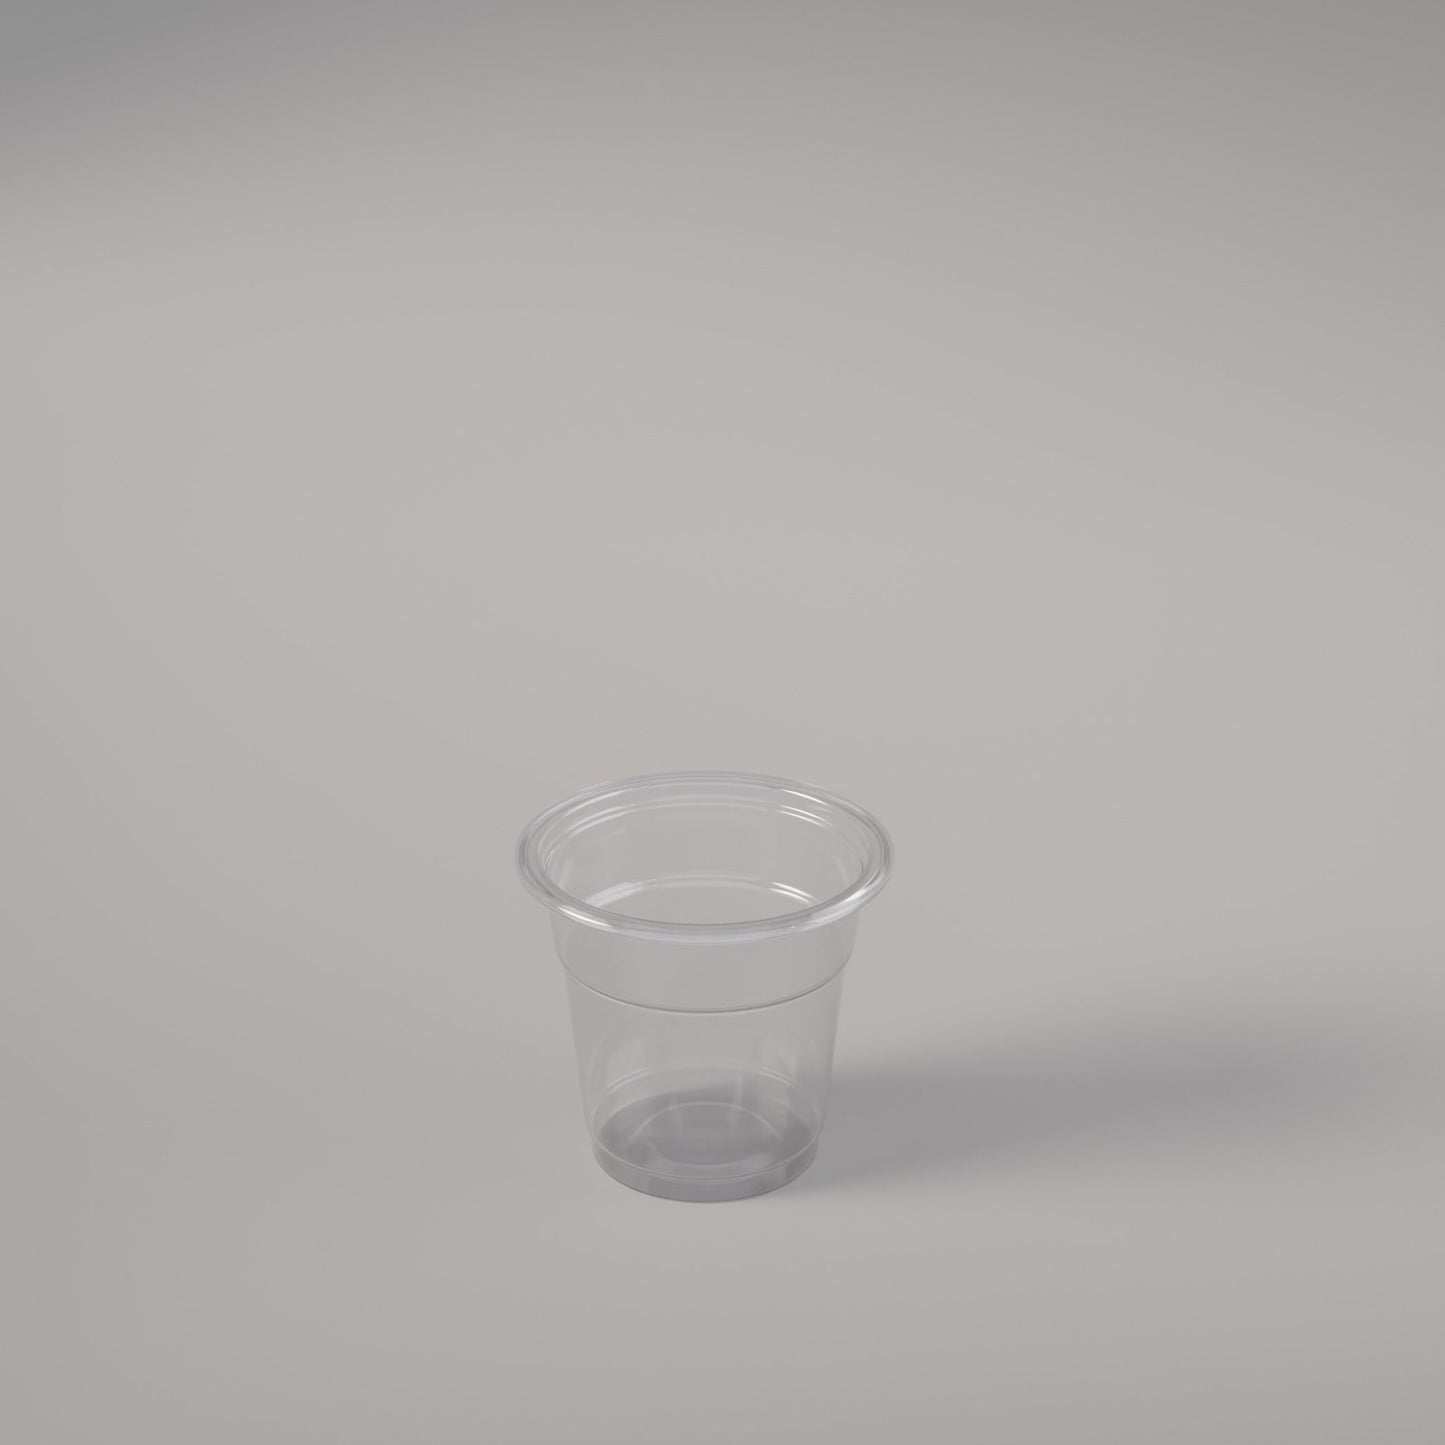 Custom Clear Plastic Cup - 3 Oz PET Plastic Cup for Cold Beverages